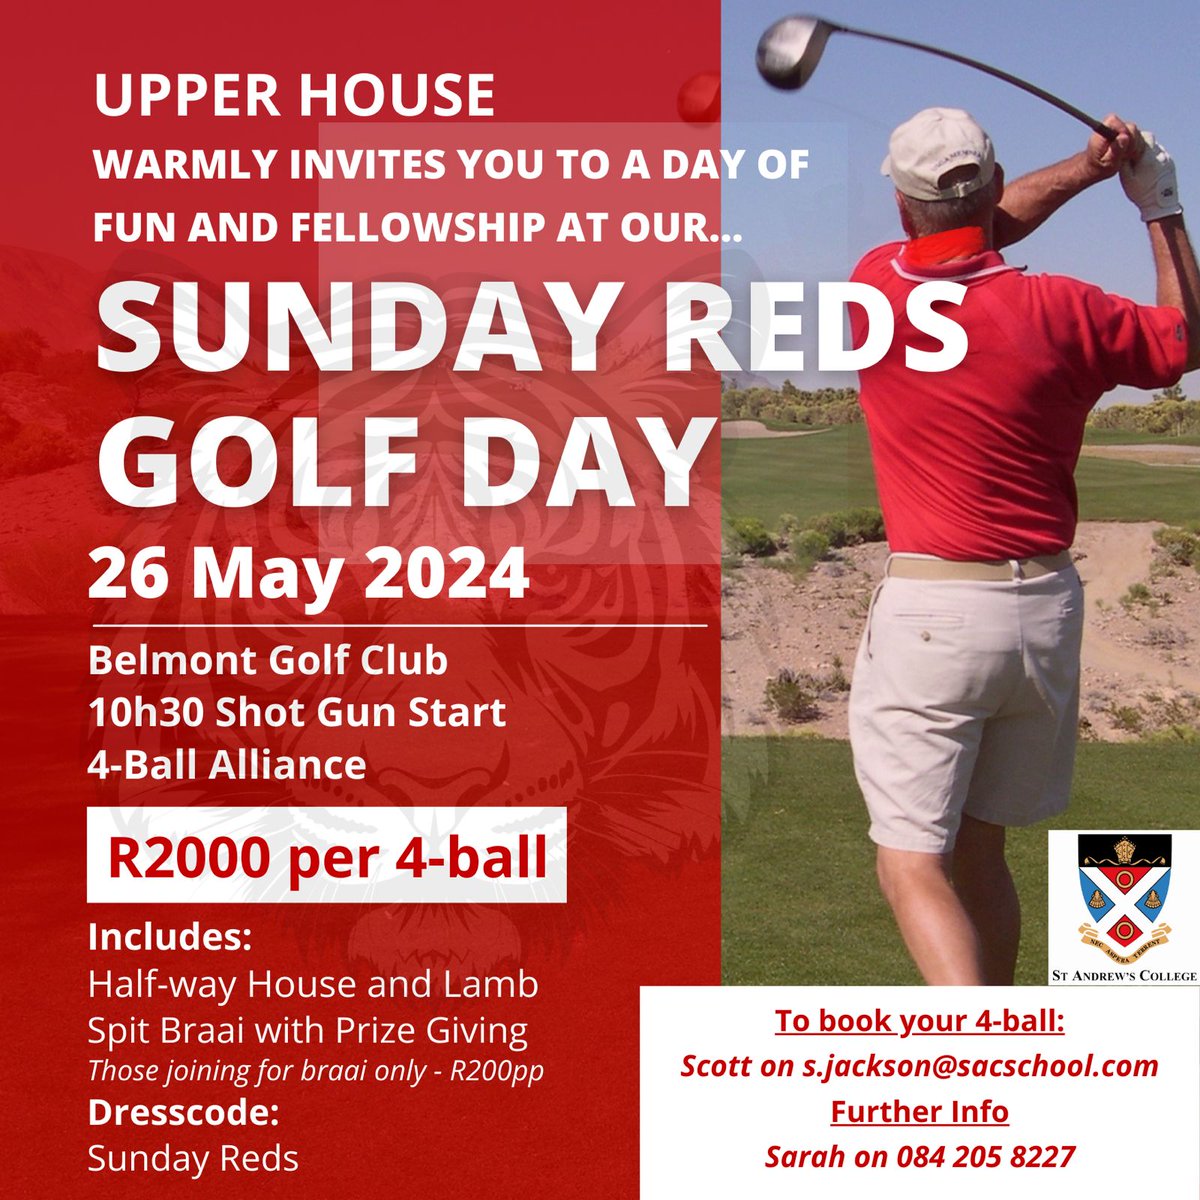 UPPER HOUSE - SUNDAY REDS GOLF DAY Upper House warmly invites you to a day of fun and fellowship at our Sunday Reds Golf Day on the 26th of May 2024 at the Belmont Golf Club. Book your 4-ball: Scott - s.jackson@sacschool.com Sarah - 084 205 8227